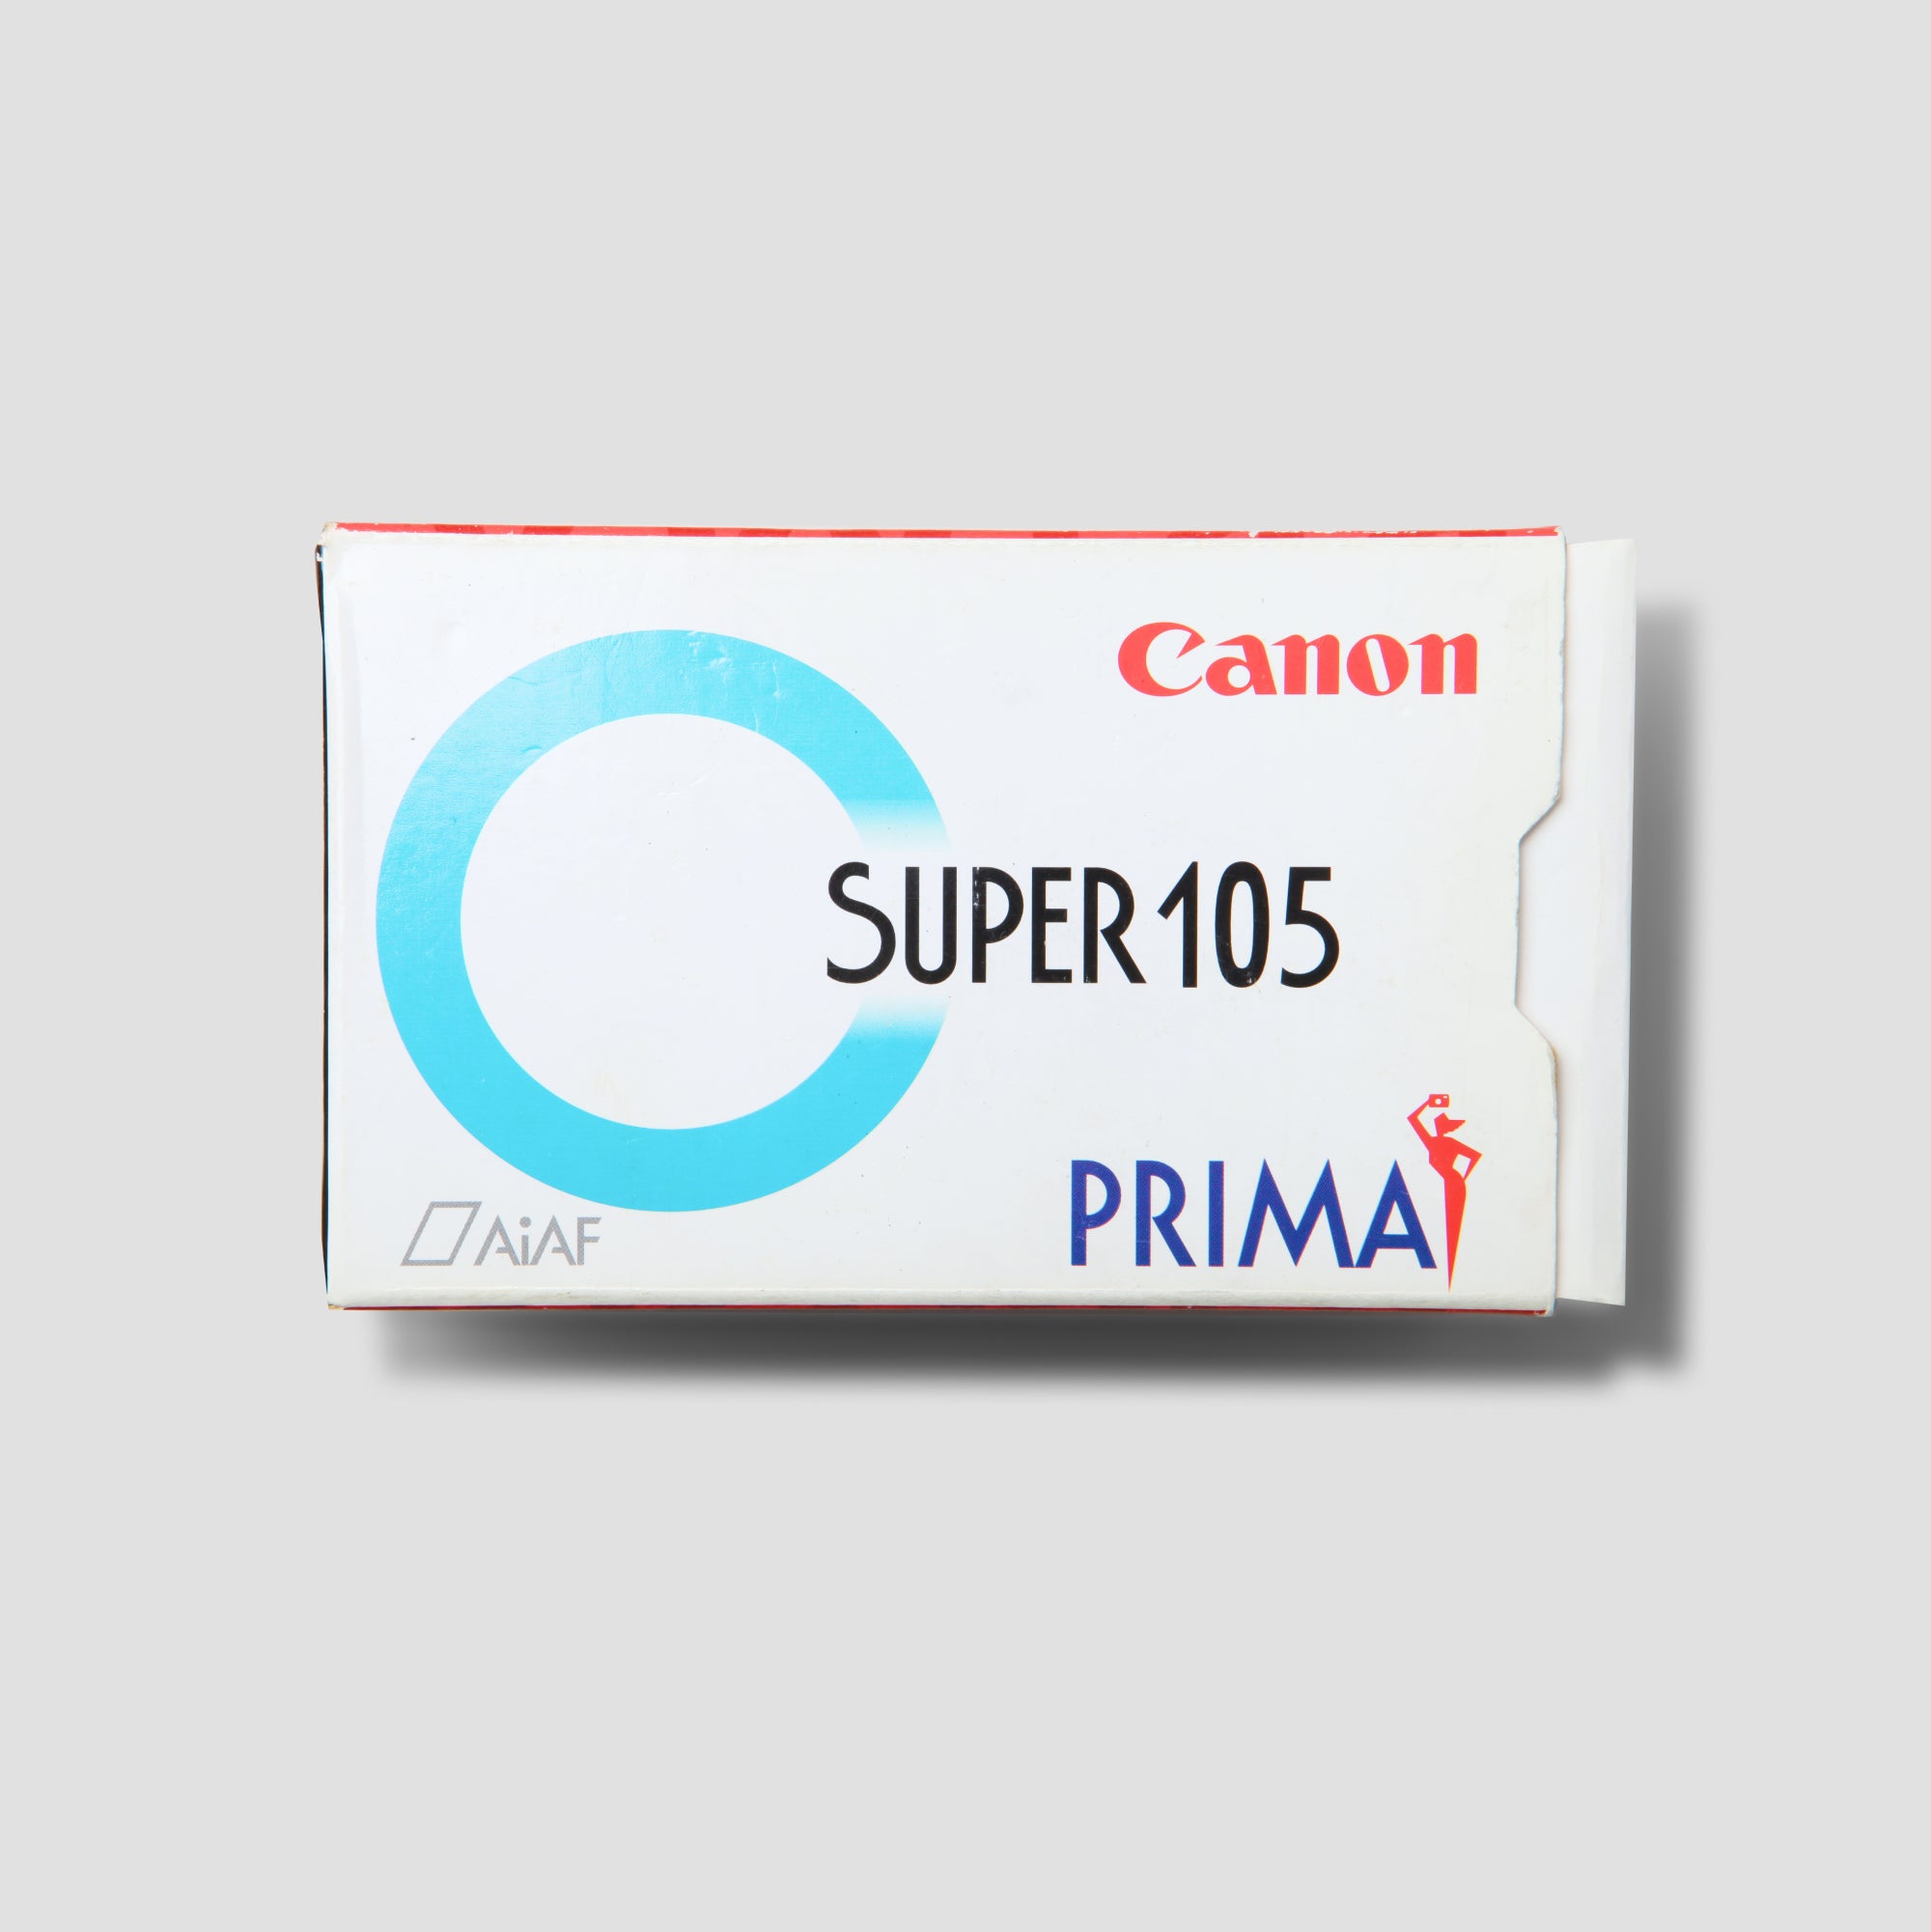 Buy Canon Prima Super 105 now at Analogue Amsterdam